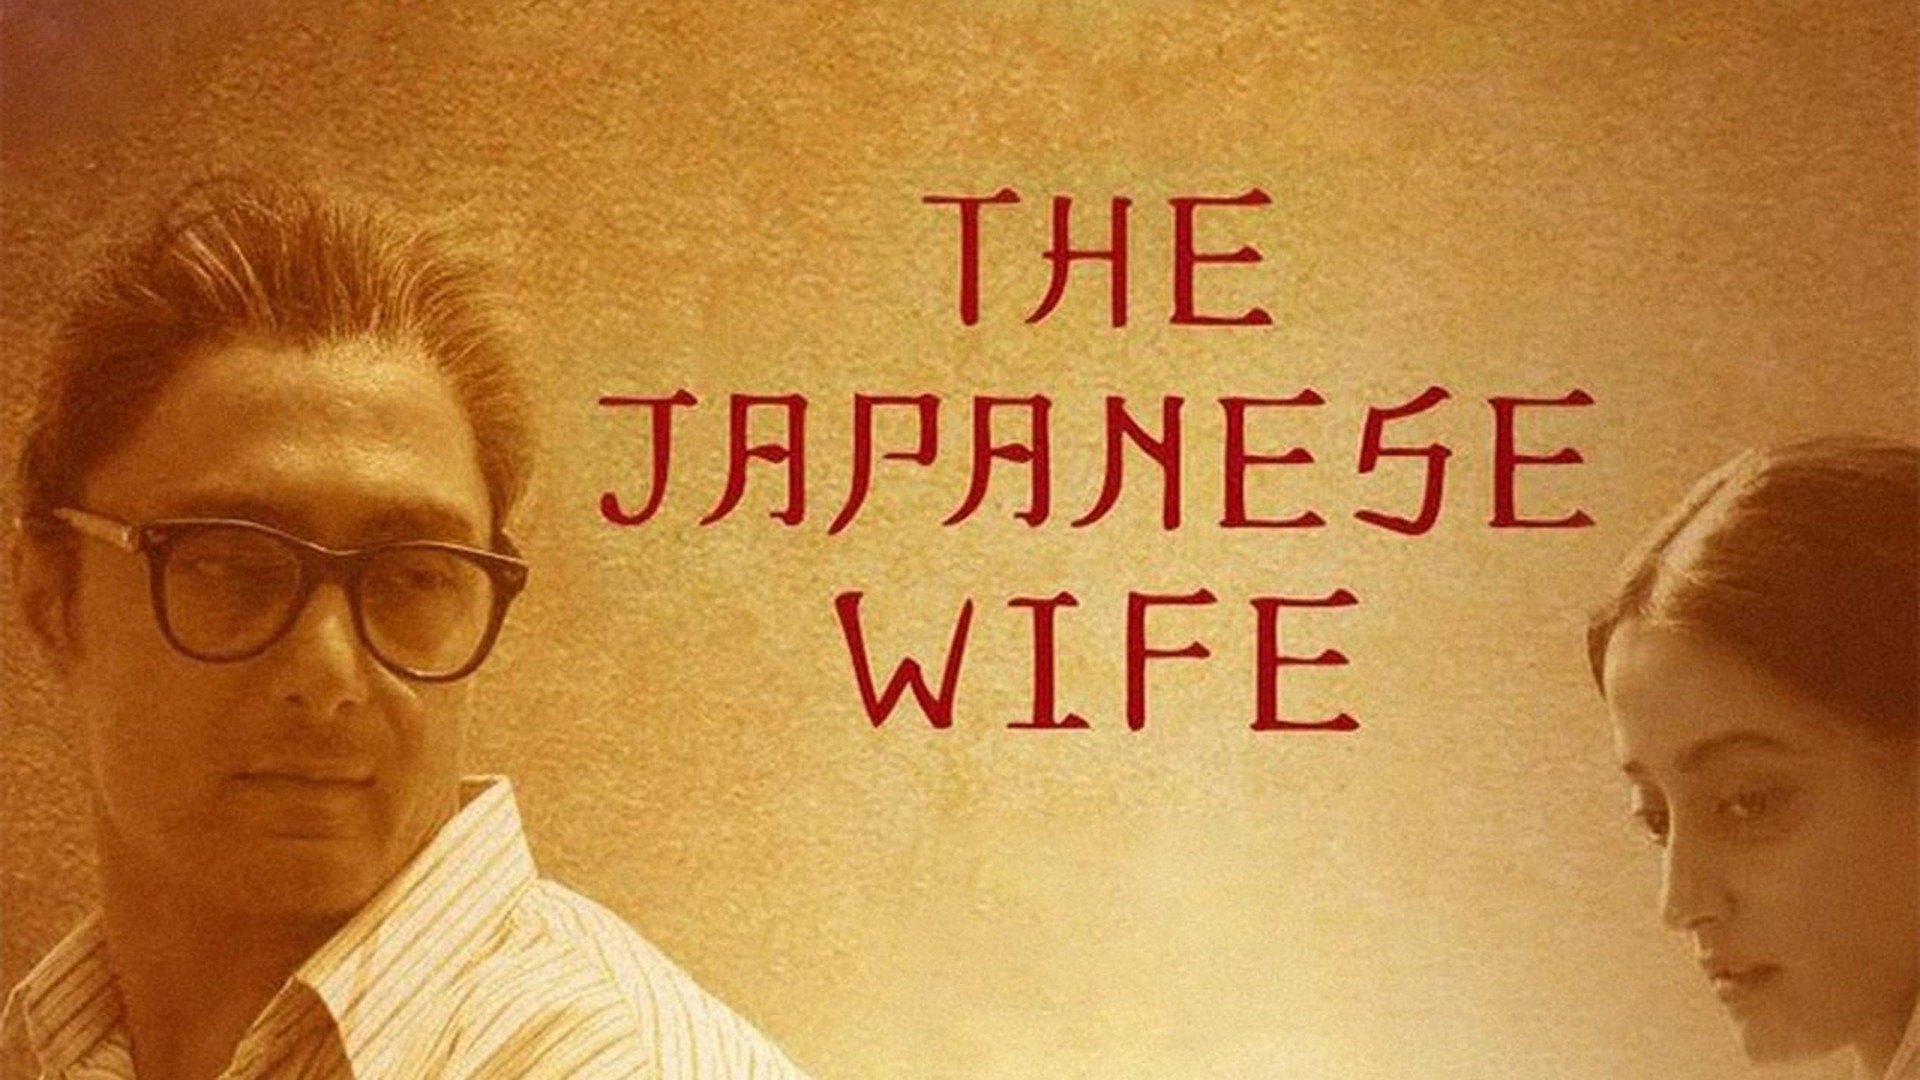 The Japanese Wife photo